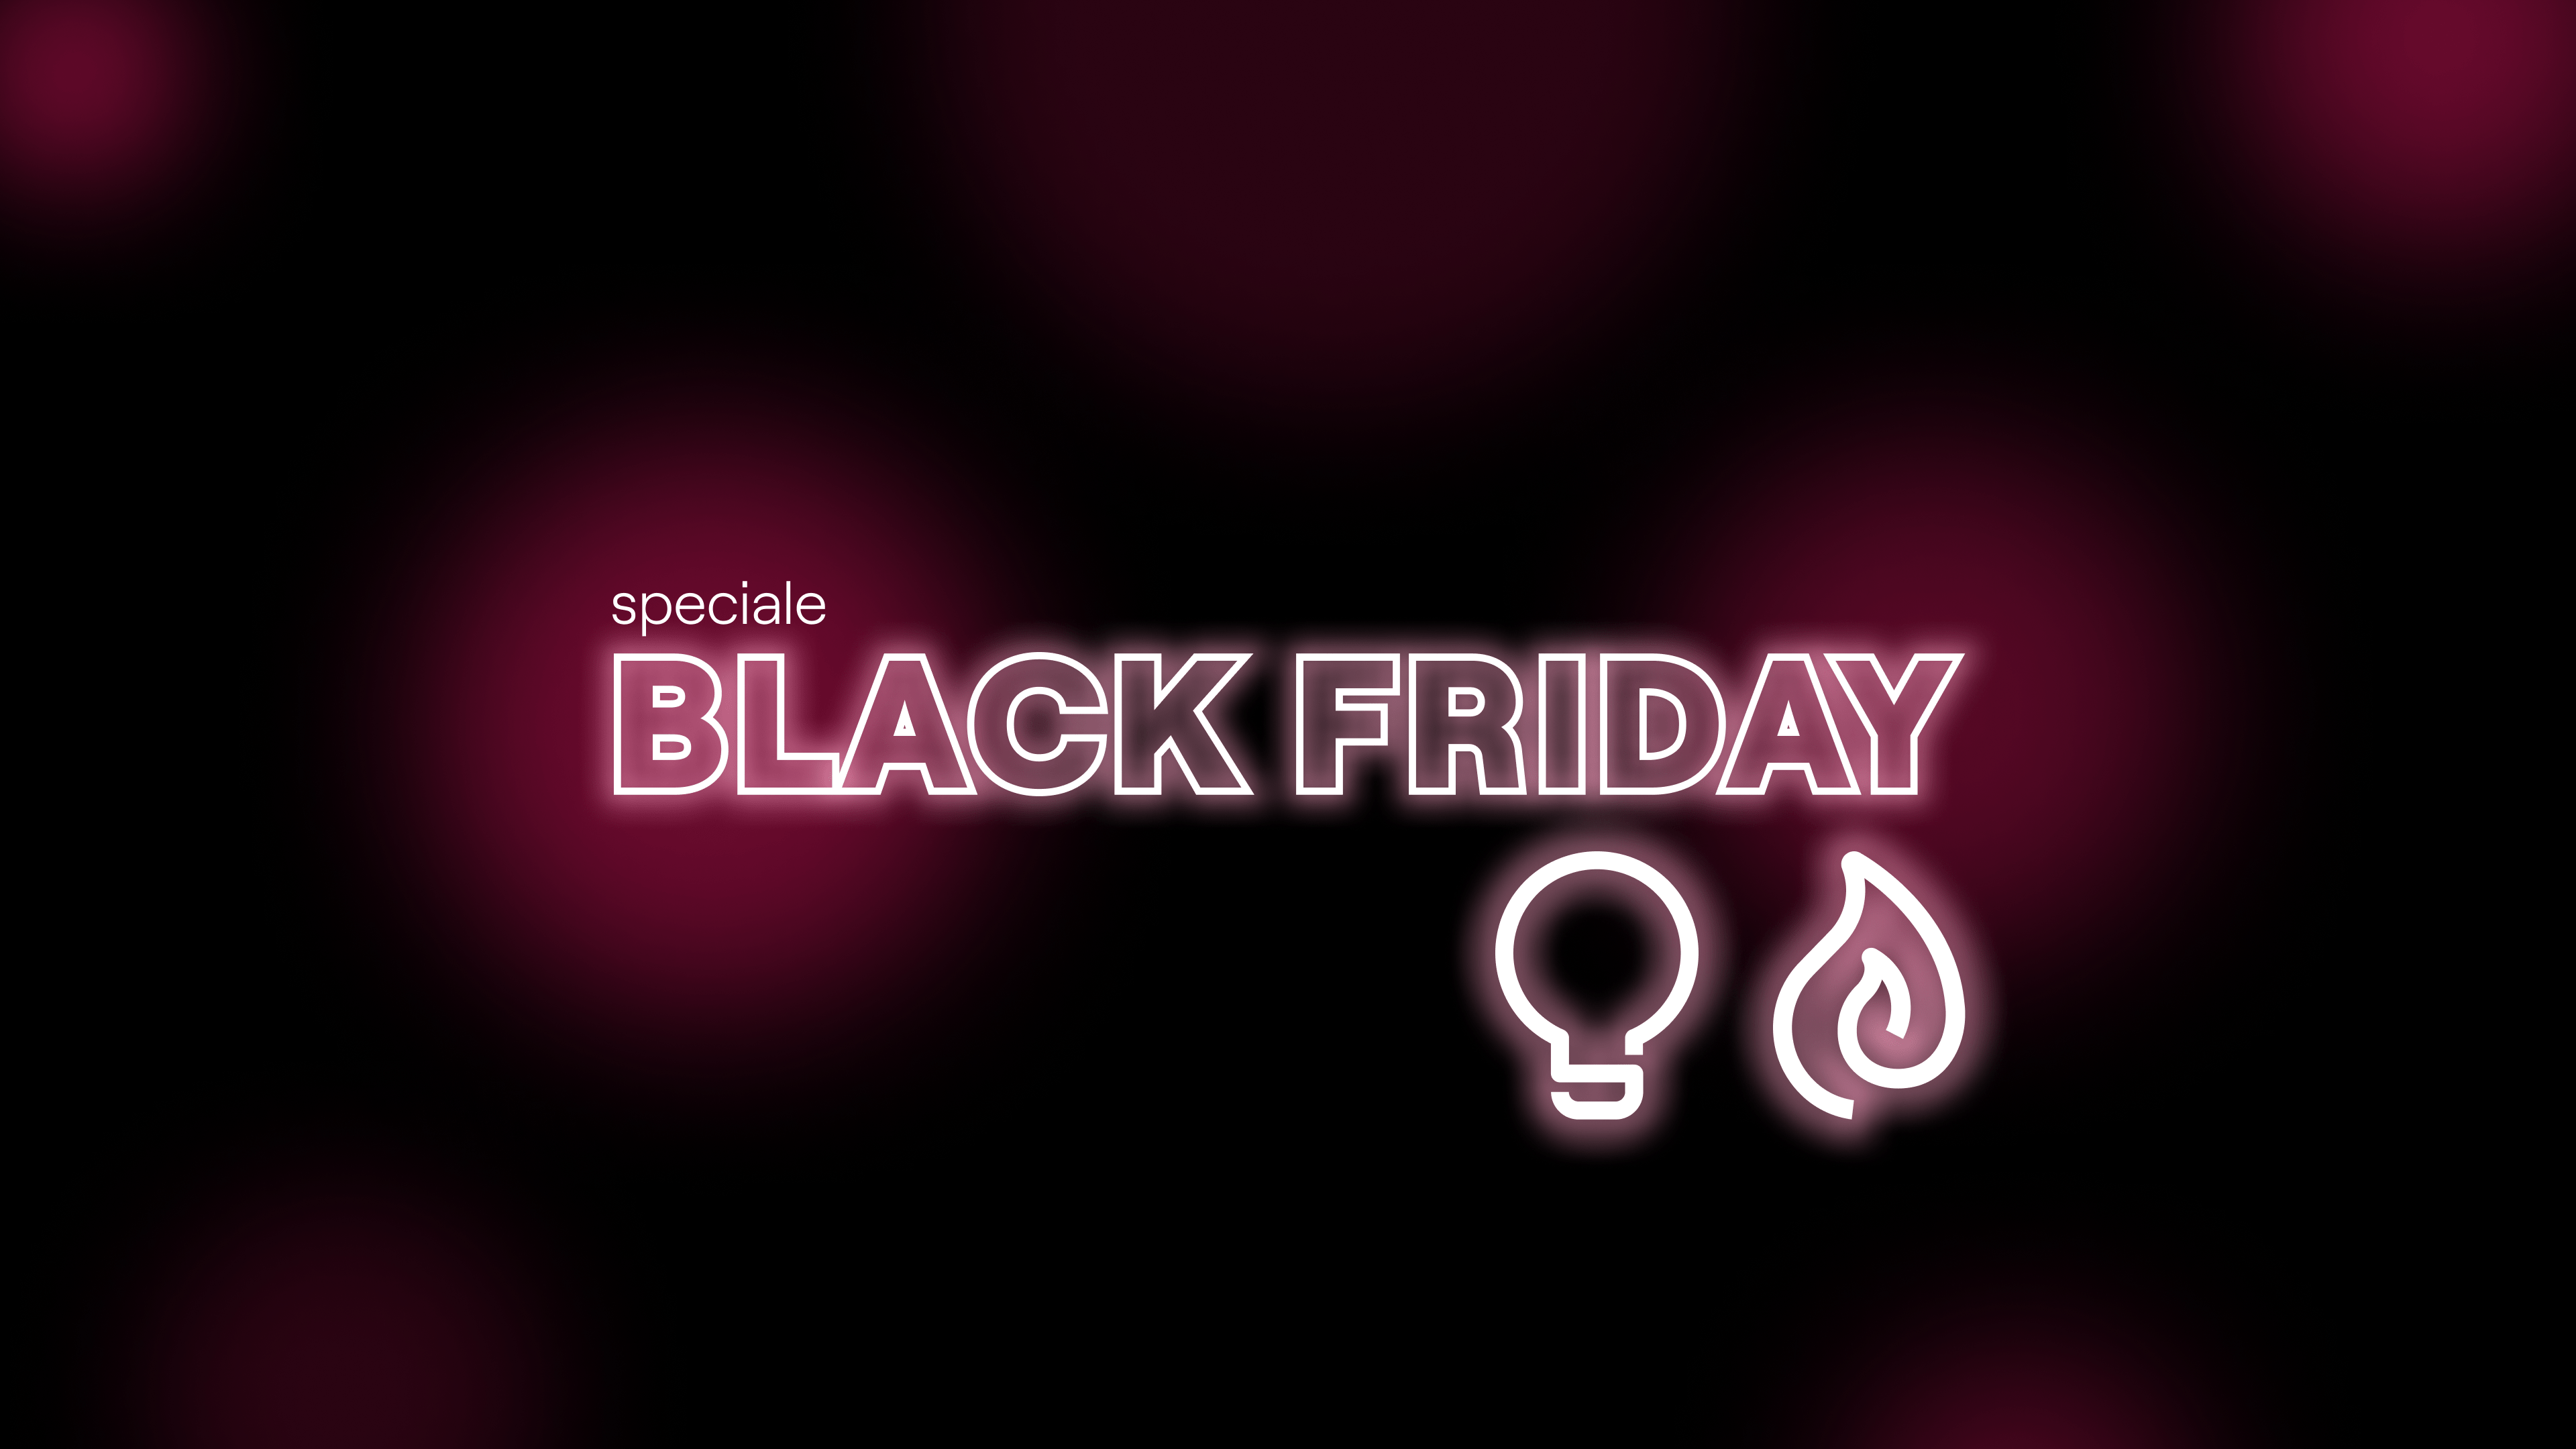 https://www.enel.it/content/dam/enel-it/immagini/flash-offer/black-friday/black-friday-2023/blackfriday-teaser-2023-1280x720.png